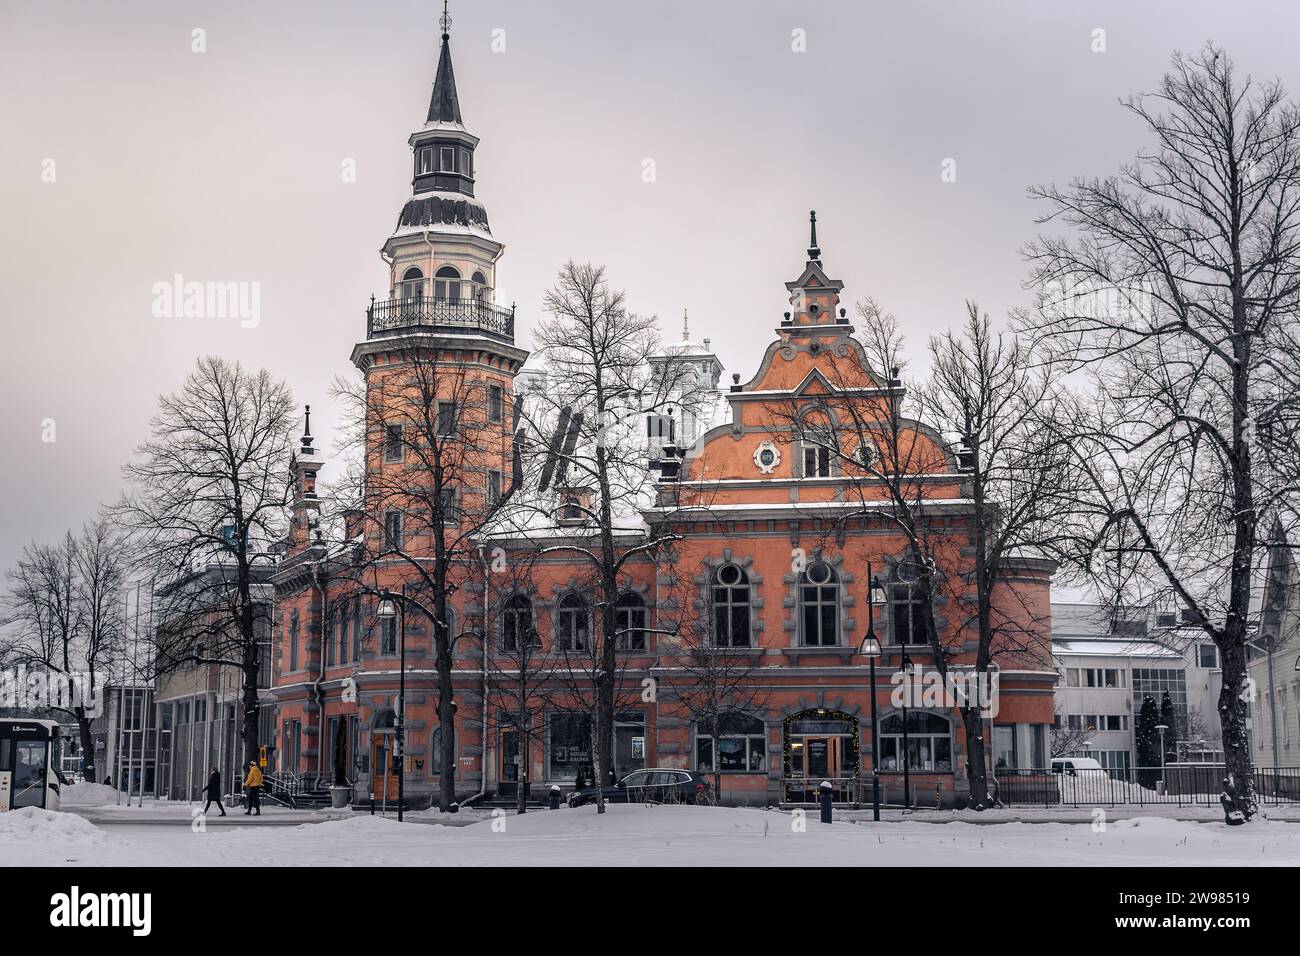 View of the Old Town Hall in Rauma, Finland Stock Photo